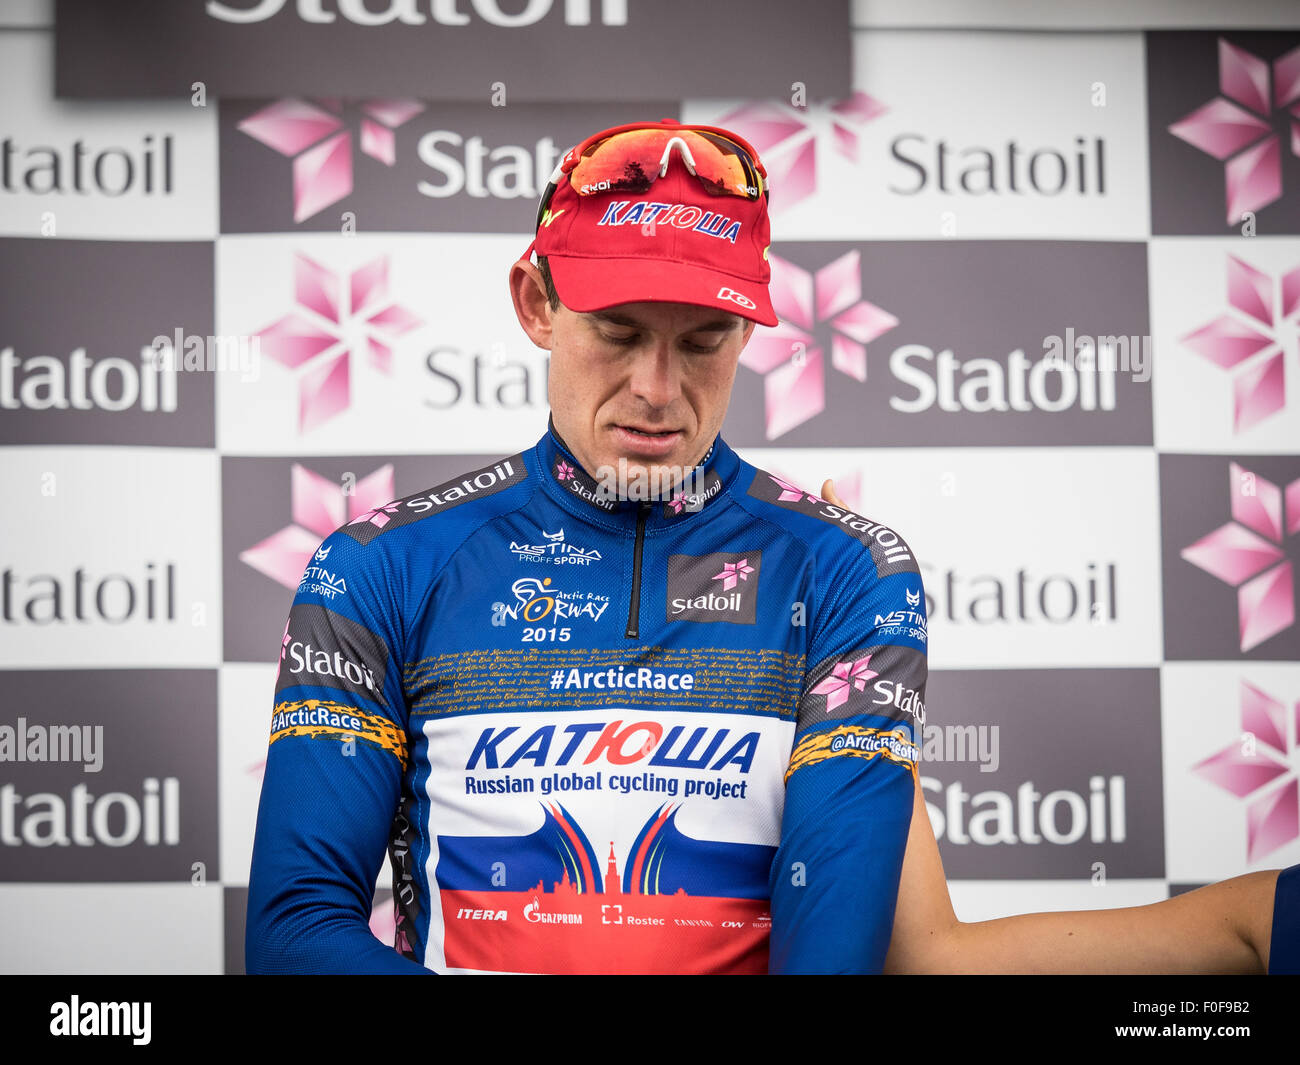 Setermoen, Norway. 14th August 2015. Alexander Kristoff from Norway cycling for Team Katusha is putting on the blue leaders jersey after the 2nd stage of Arctic Race of Norway 2015. The stage was 162,5km and started in Evenskjaer and ended in Setermoen. Alexander Kristoff ended as number 3 in the 2nd stage. Credit:  Ole Mathisen/Alamy Live News Stock Photo